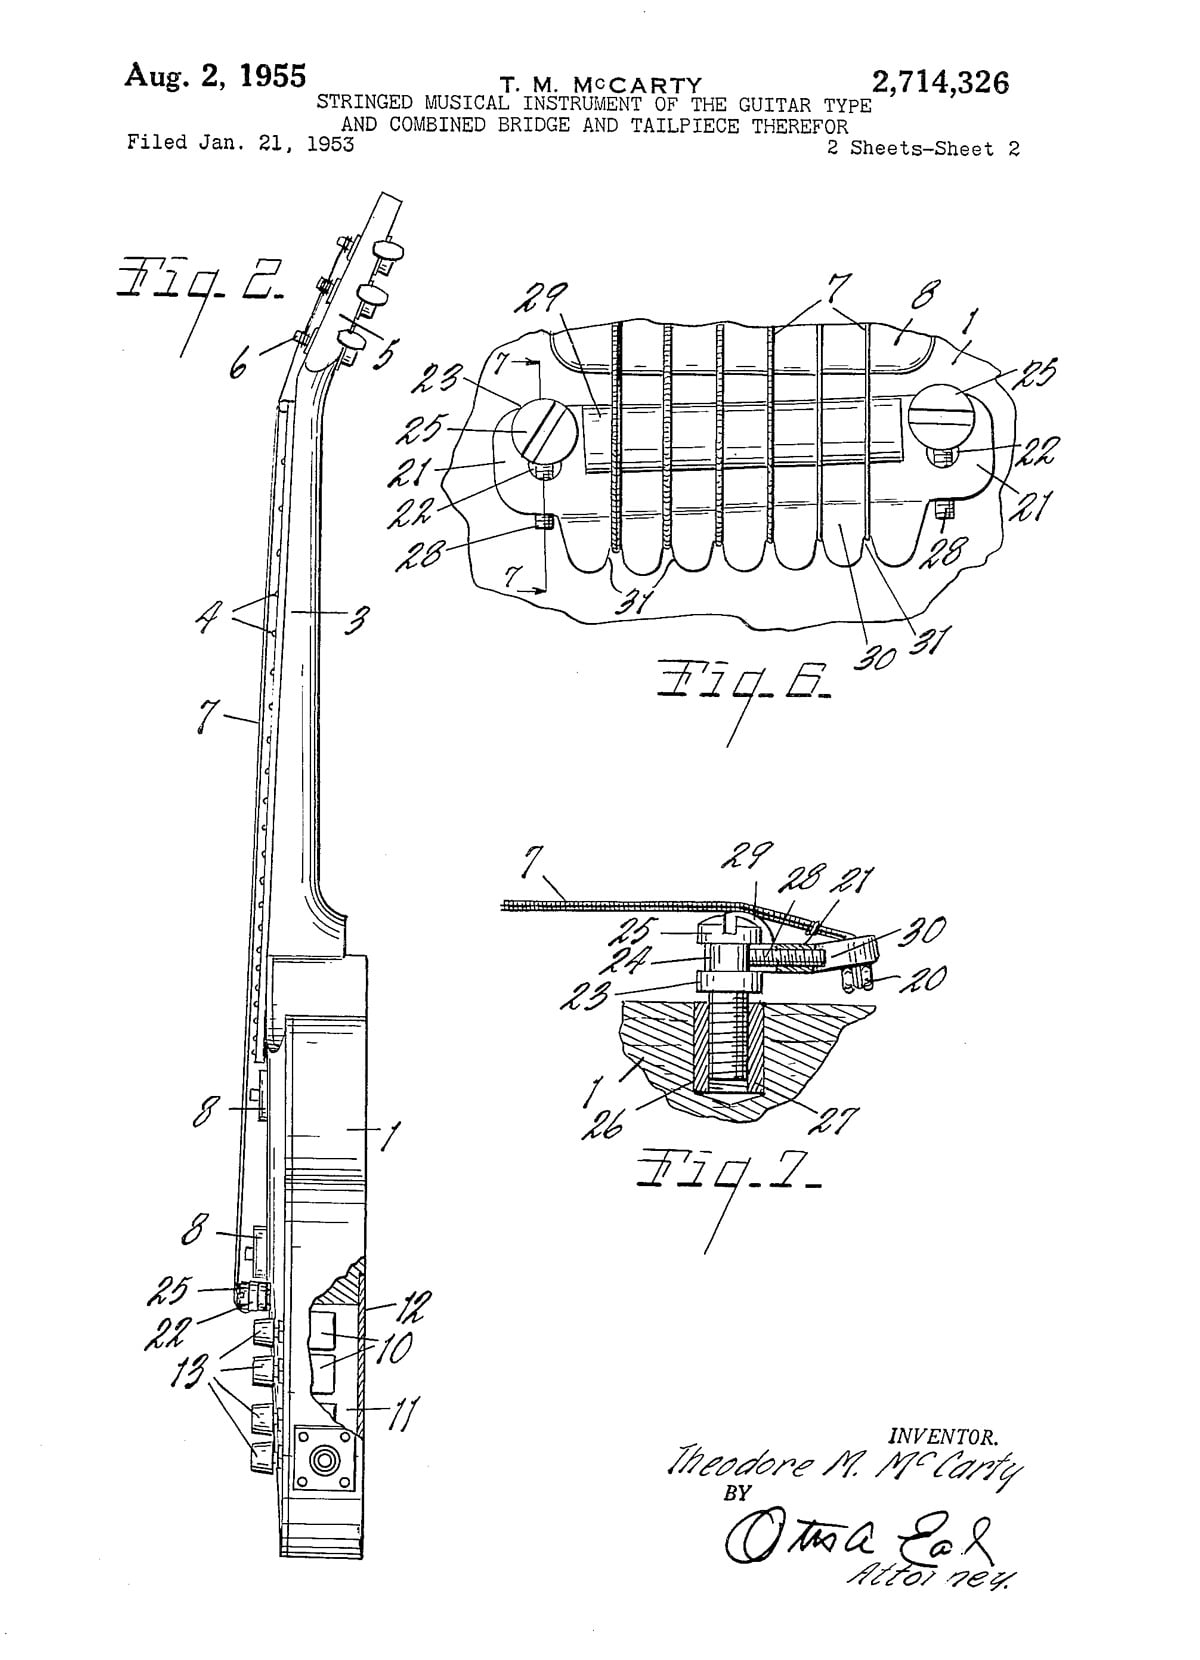 Stringed musical instrument of the guitar type and combined bridge and tailpiece therefor